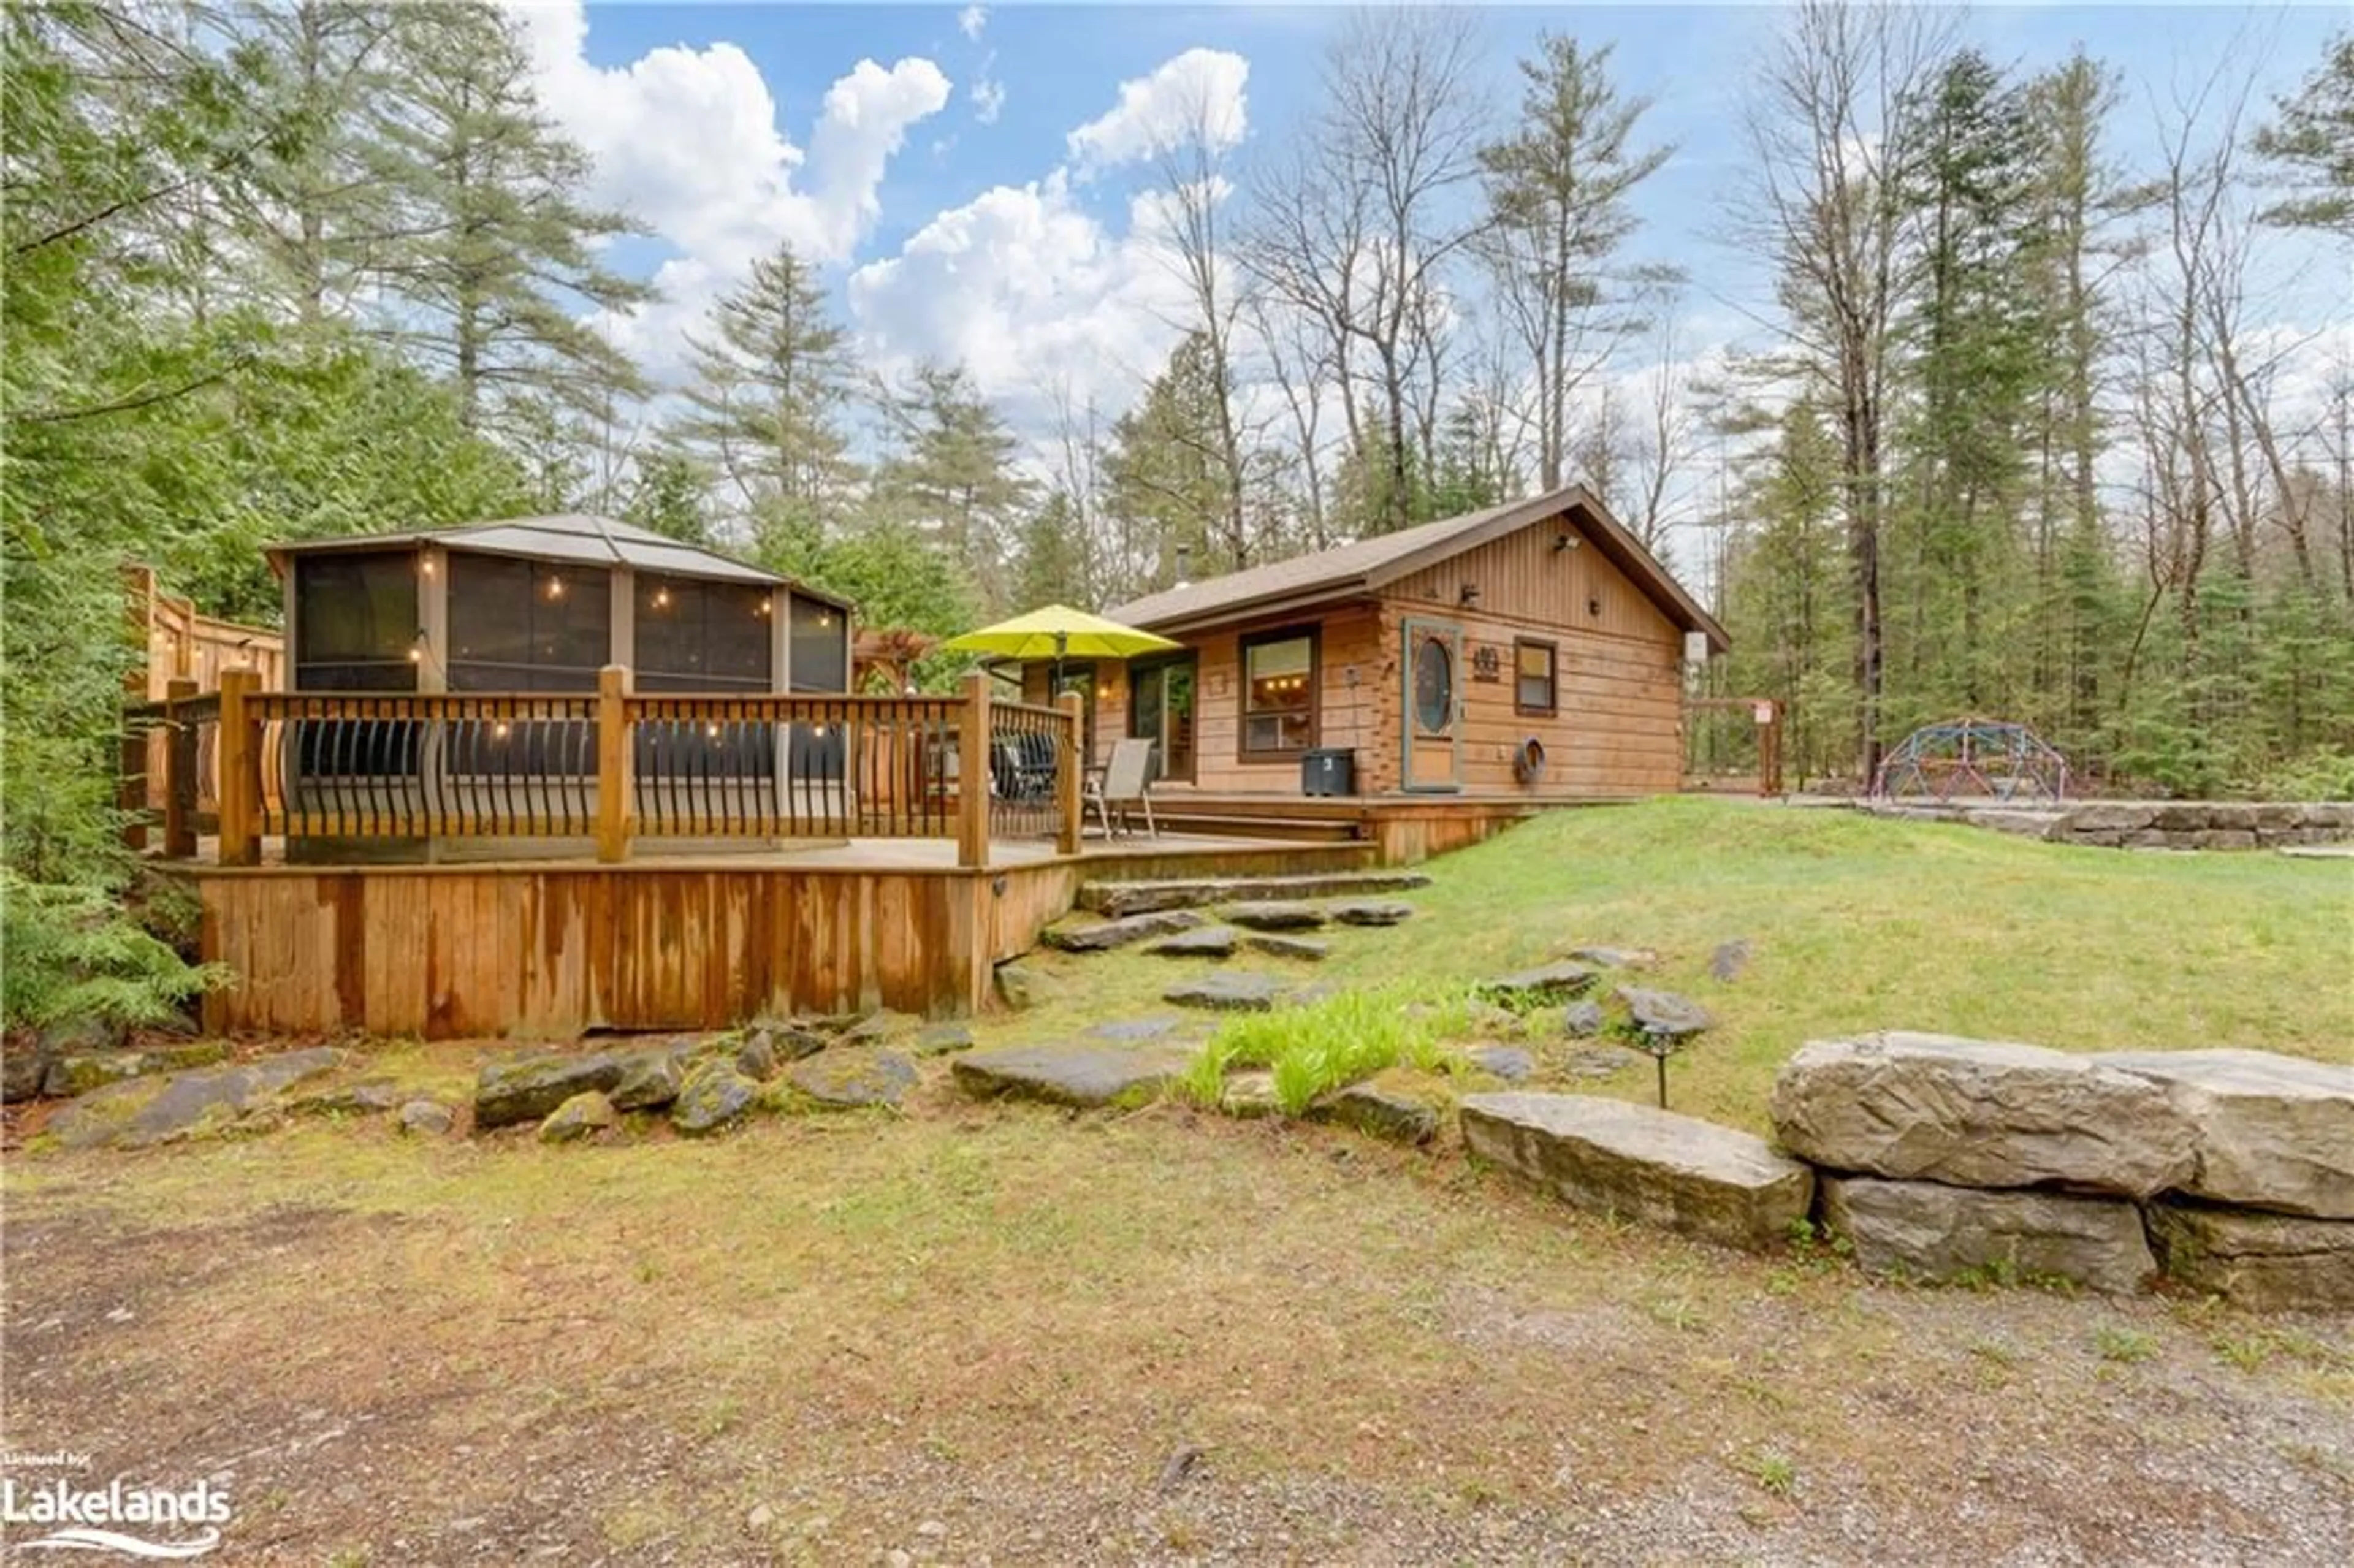 Cottage for 24 East Clear Bay Rd, Kinmount Ontario K0M 2A0